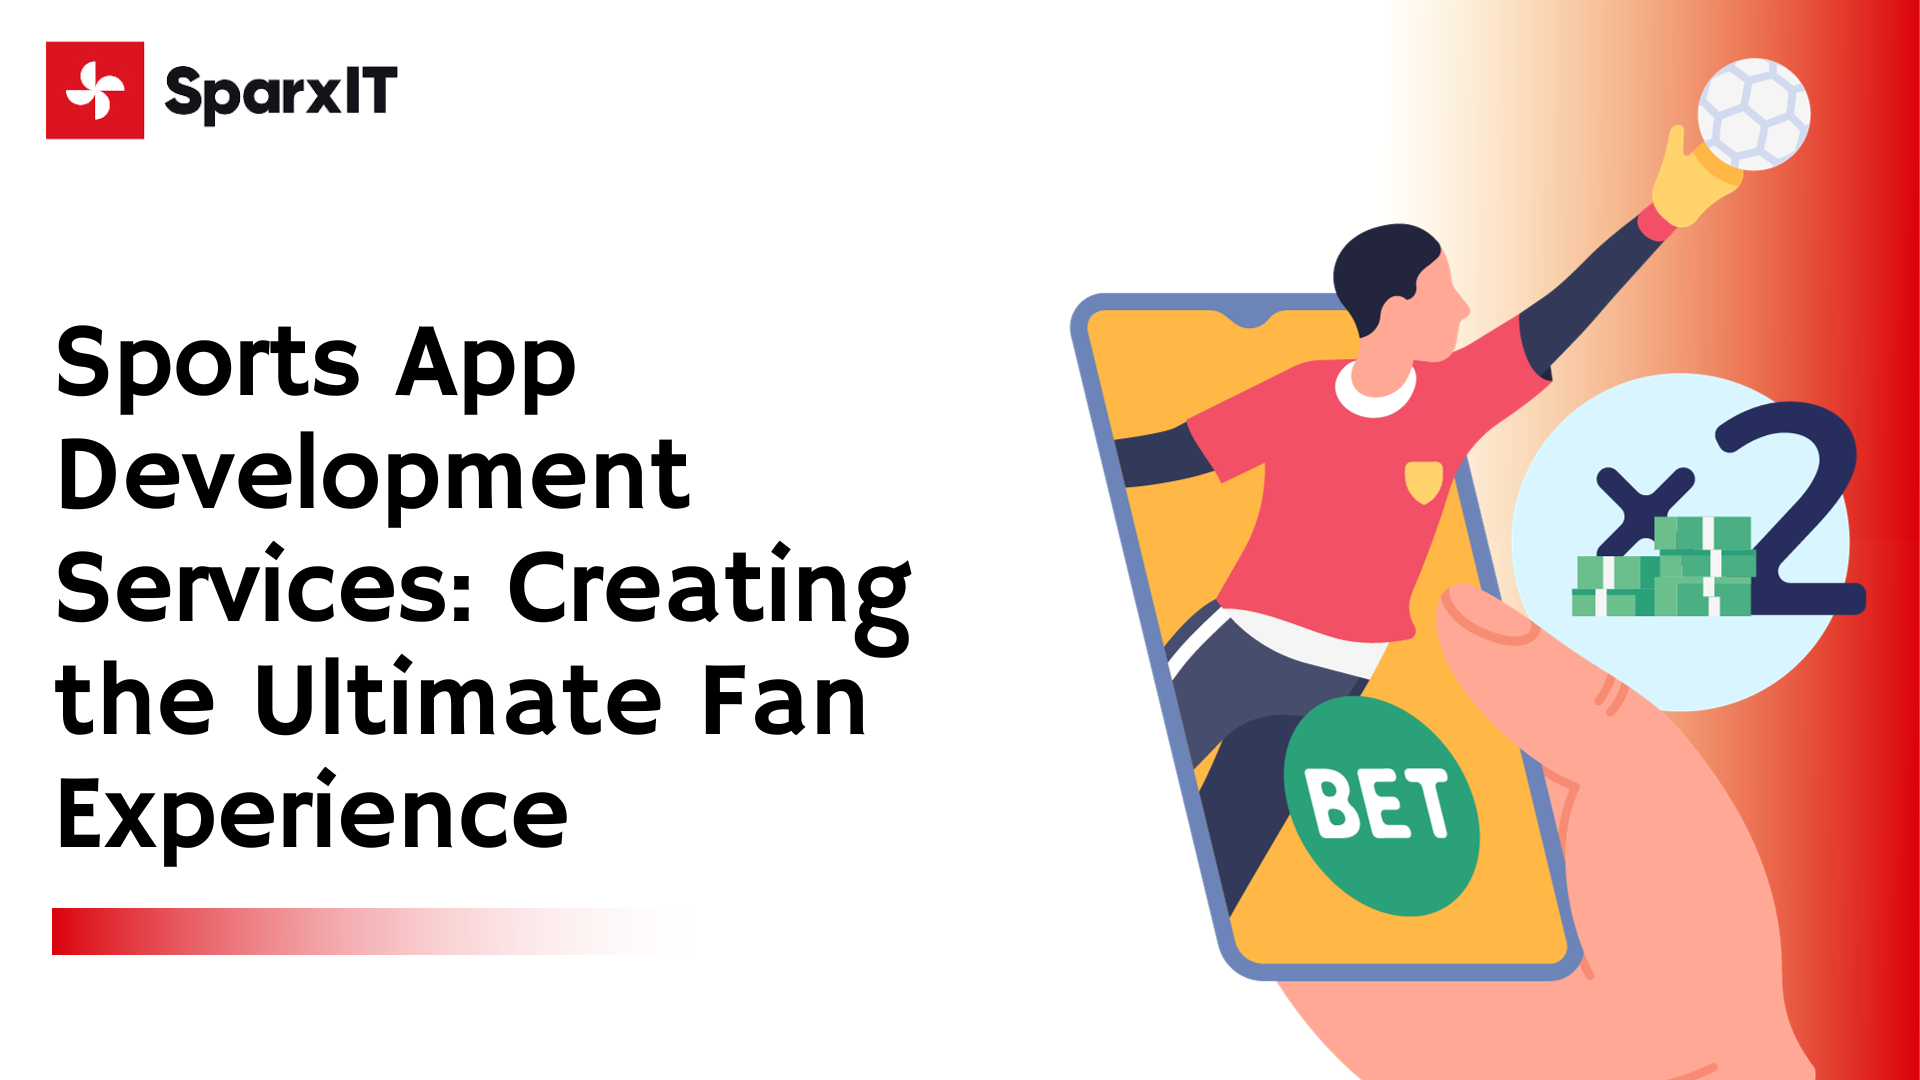 Sports App Development Services: Creating the Ultimate Fan Experience